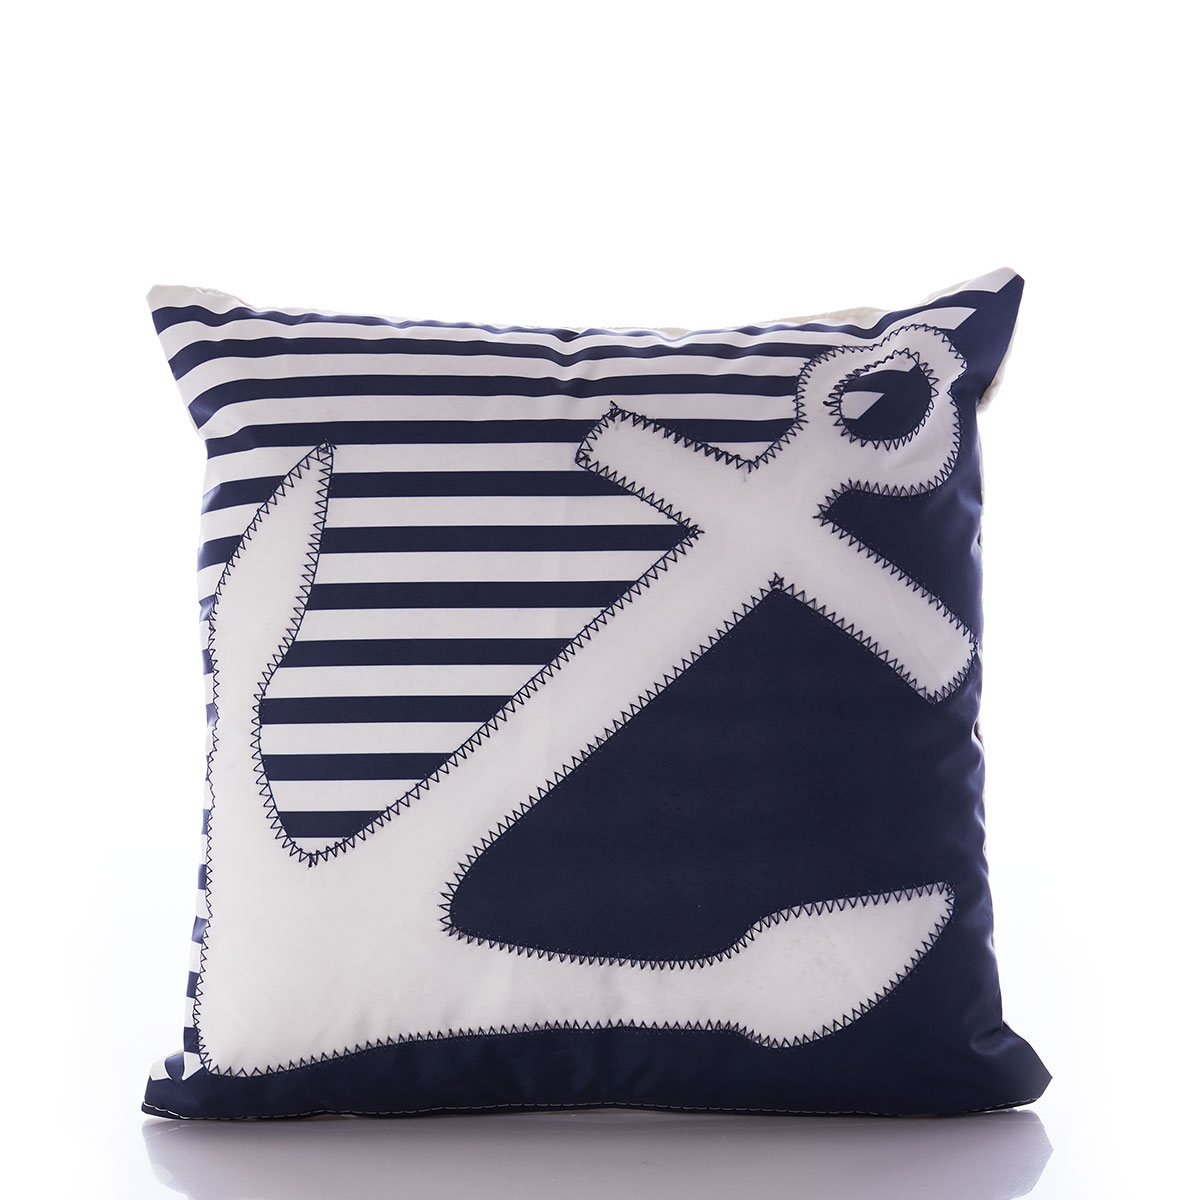 the breton stripe white anchor pillow is embellished with a white anchor in front of a solid navy bottom corner and a navy and white striped top corner